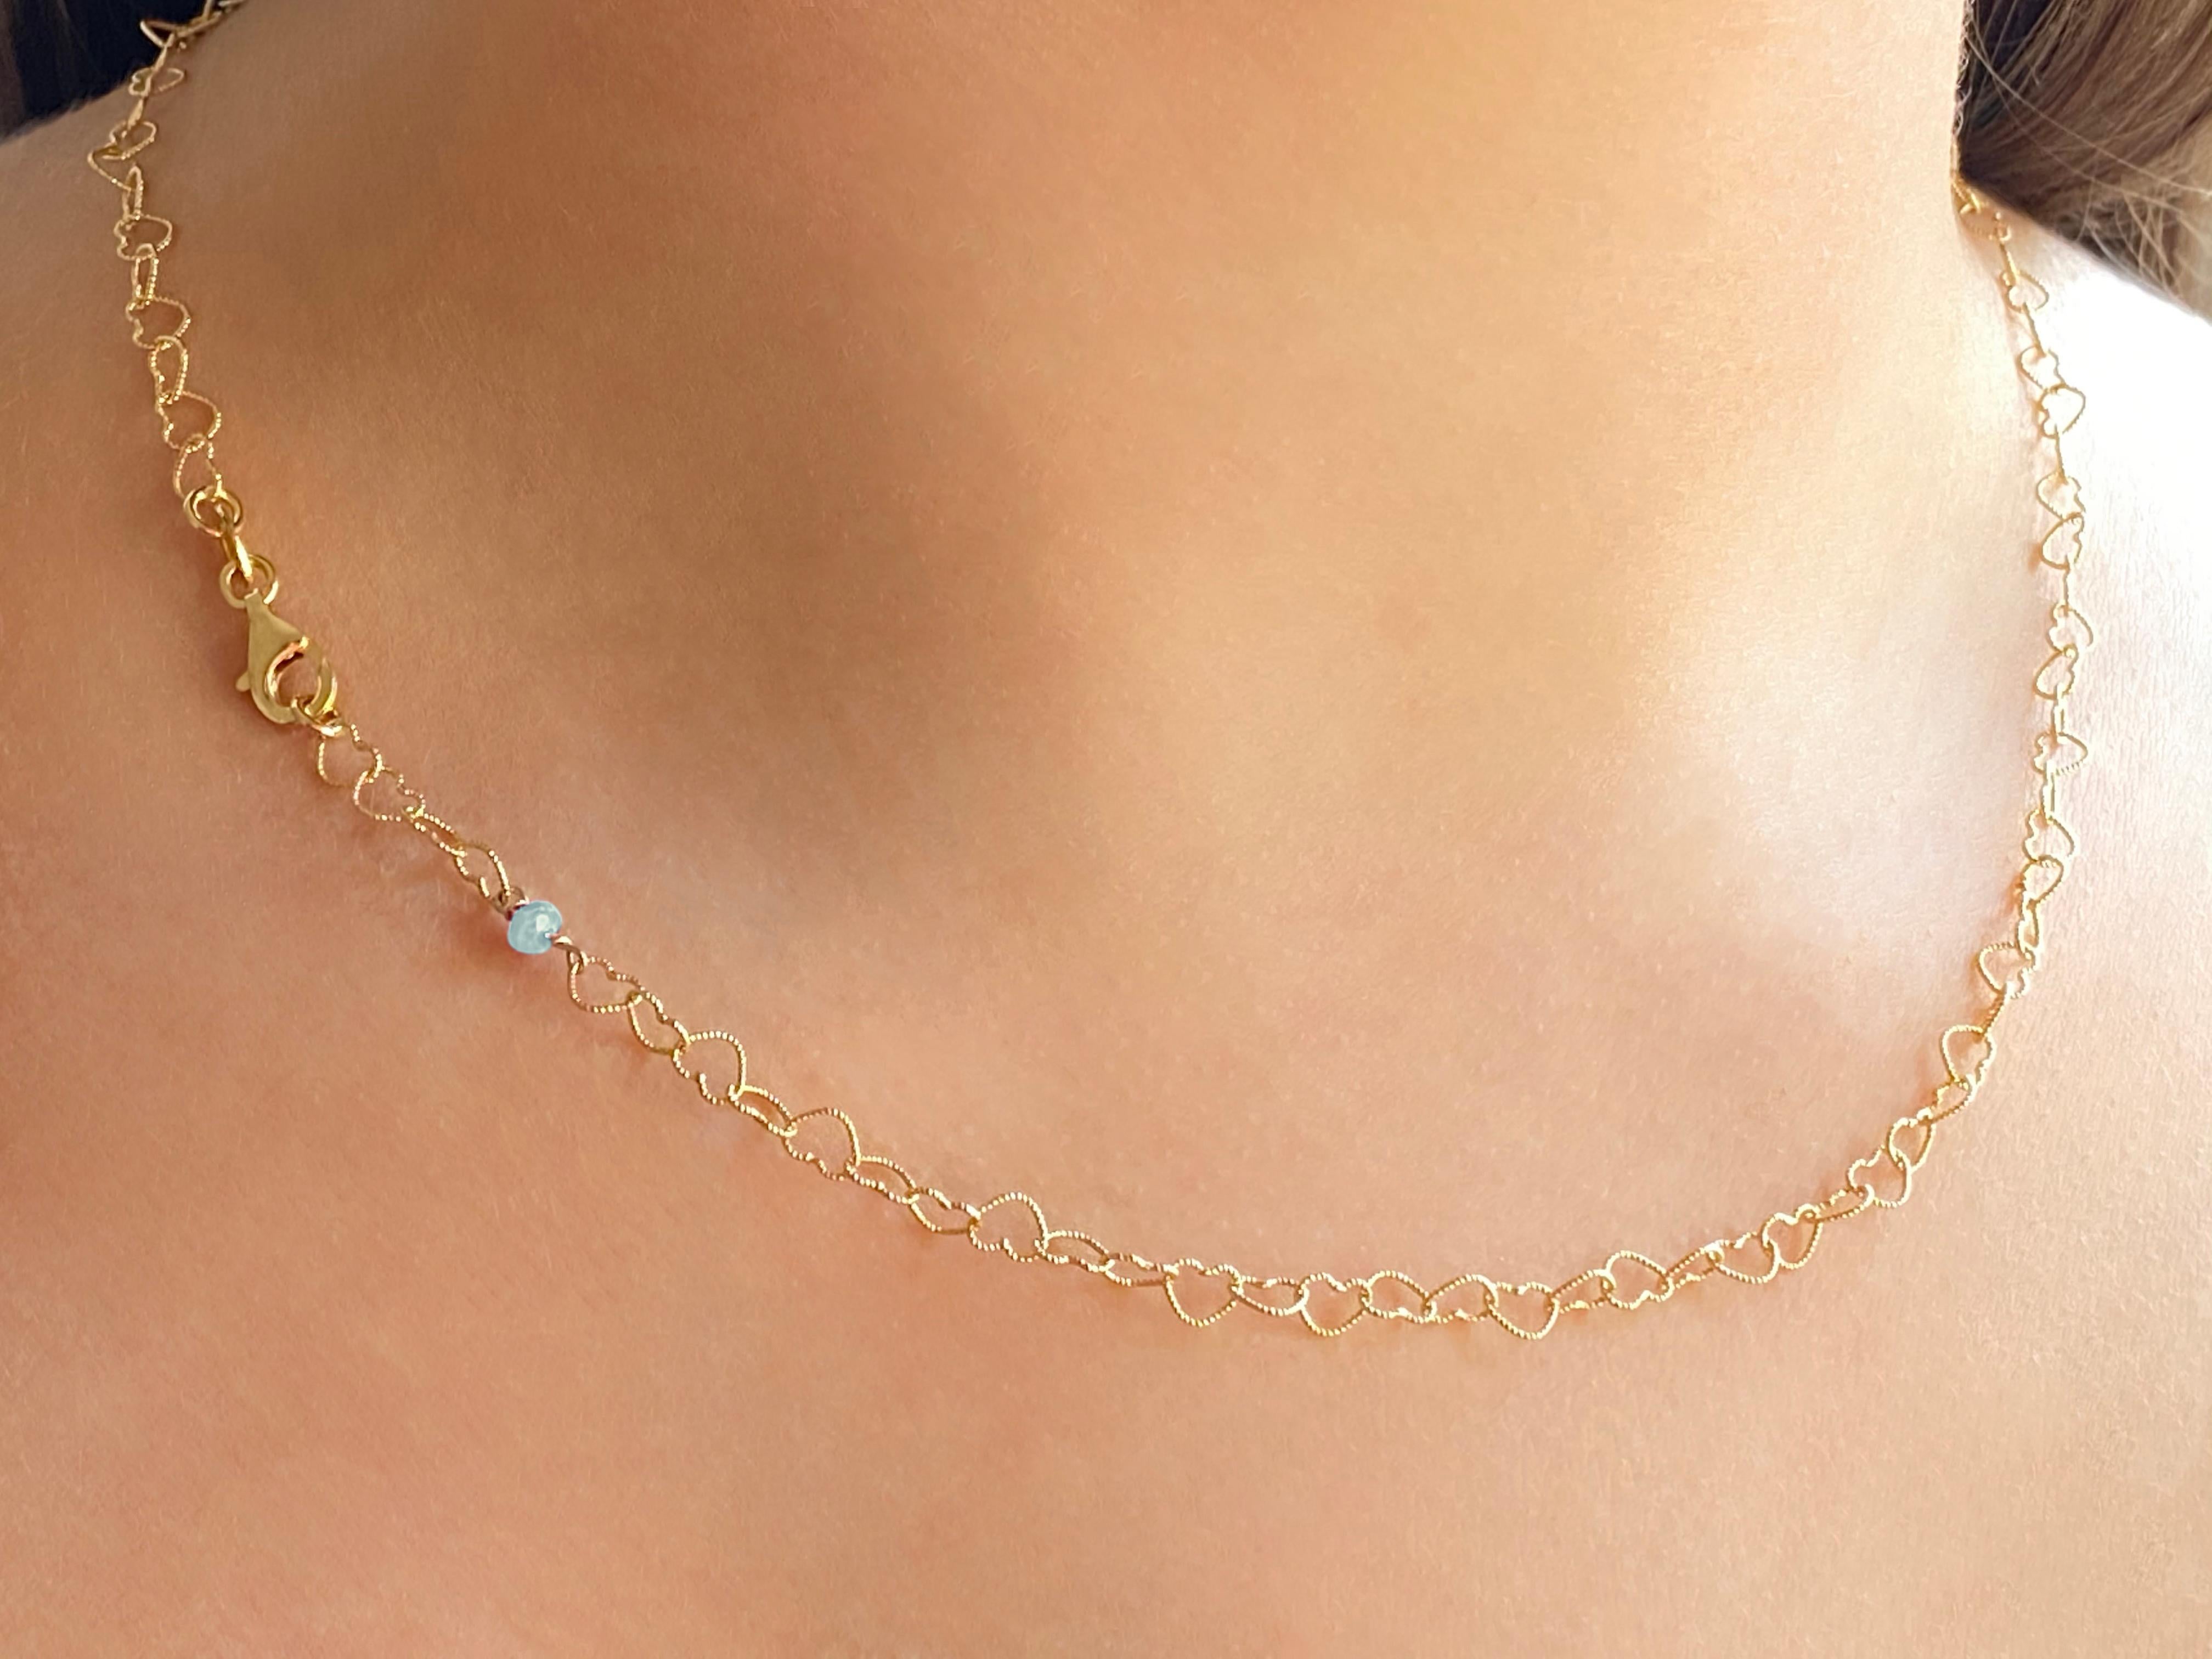 Rossella Ugolini Design Collection 0.45 Carat Bead Cut Aquamarine 18 Karat Yellow Gold Little Hearts Chain Necklace
A nice necklace handcrafted in 18 karats yellow gold and embellished with an aquamarine that fits every outfit due to its semplicity.